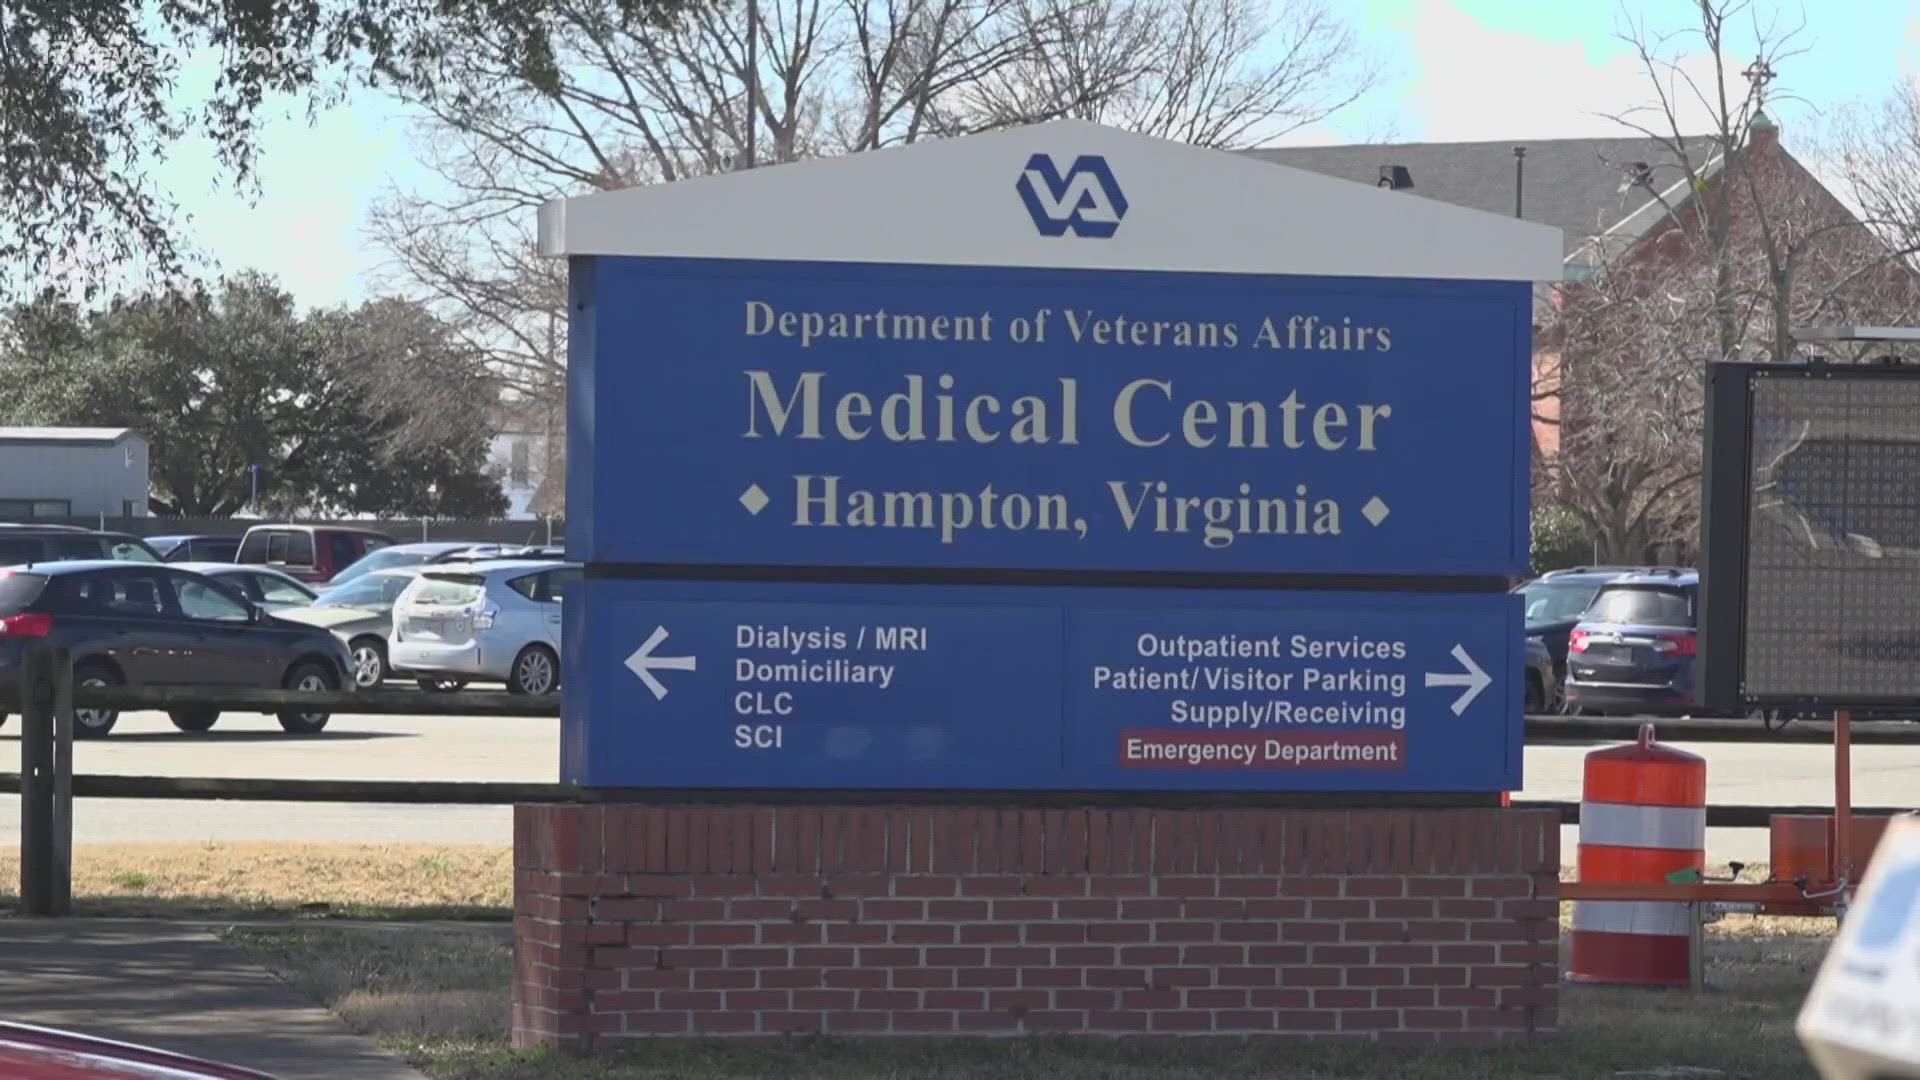 The VA would receive $325.1 billion, the largest appropriation for the department ever, representing a 5% increase from last year's approved budget.